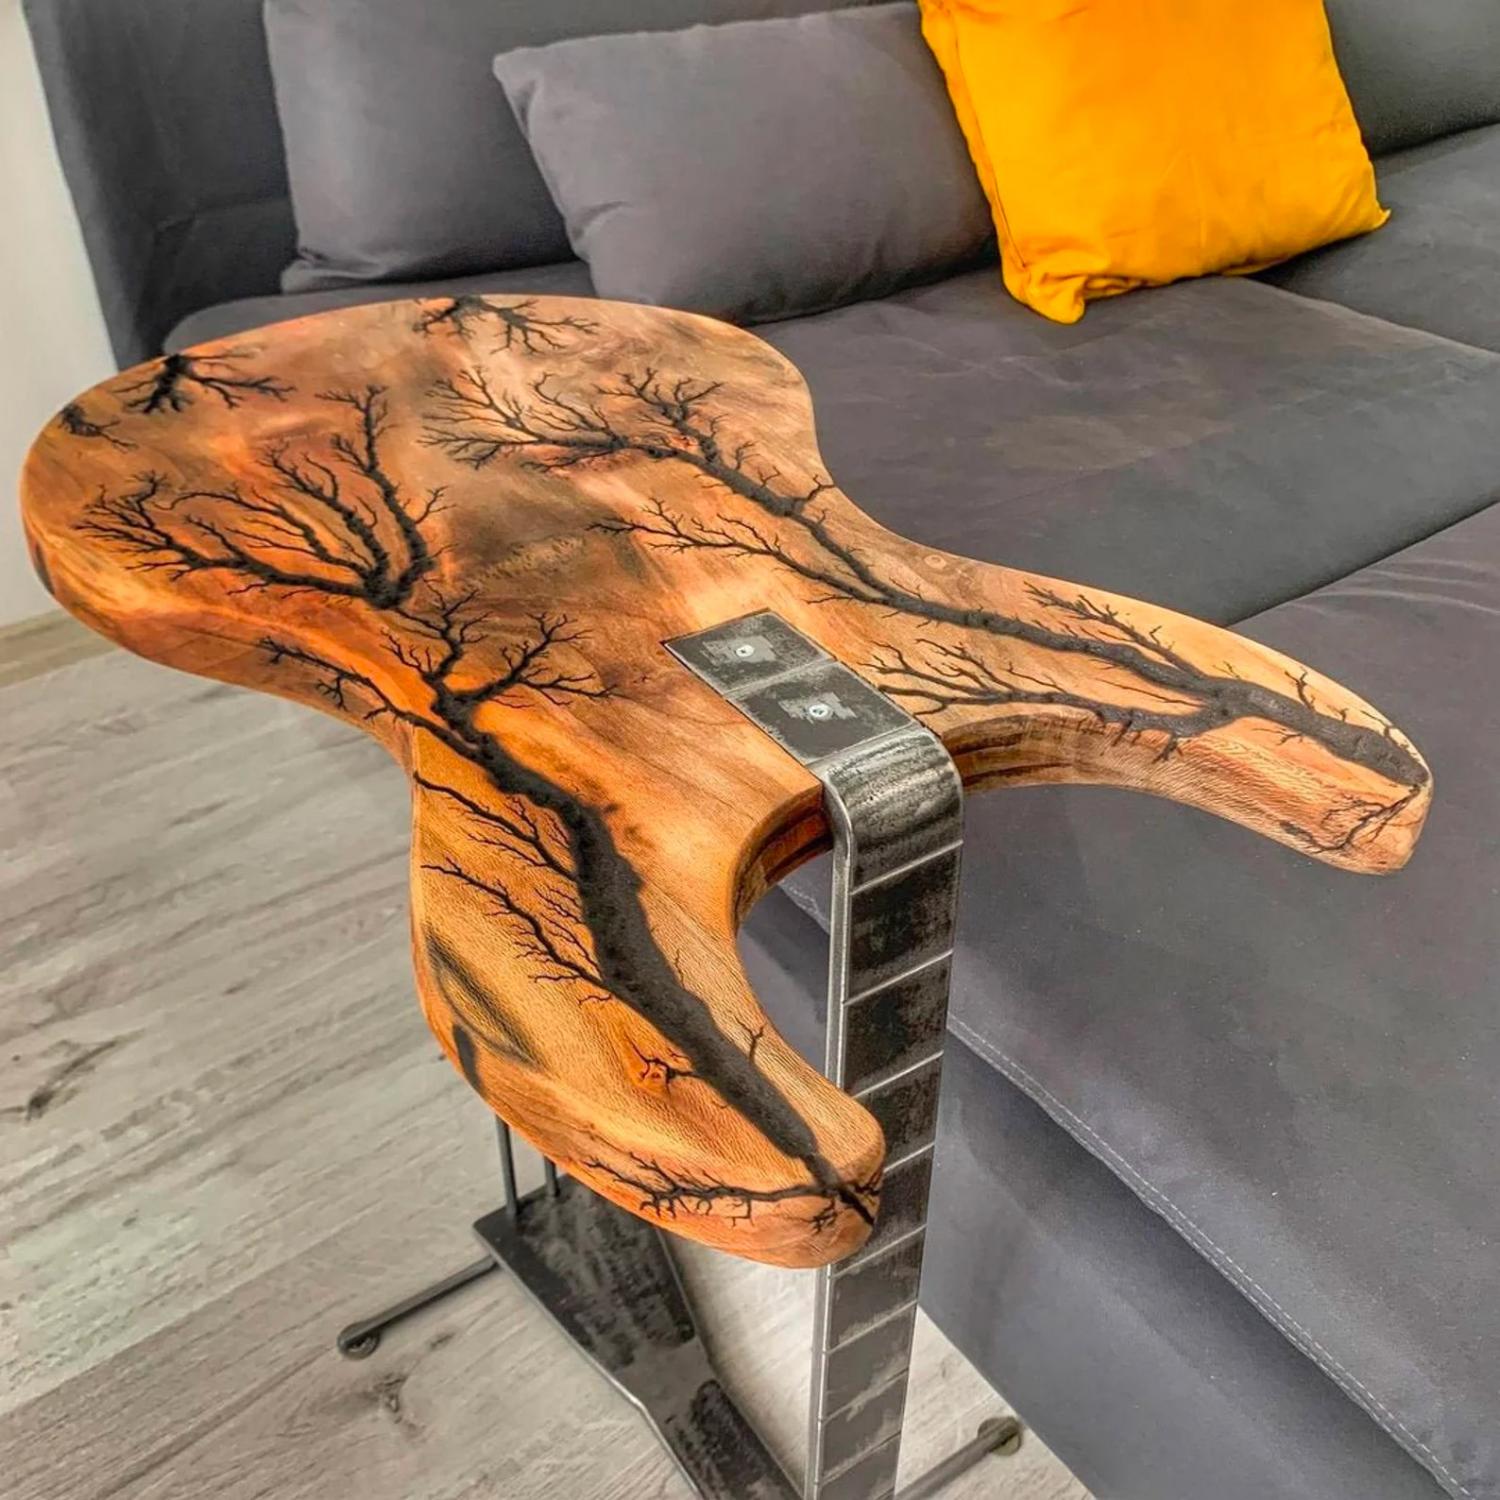 Wooden Guitar shaped side table